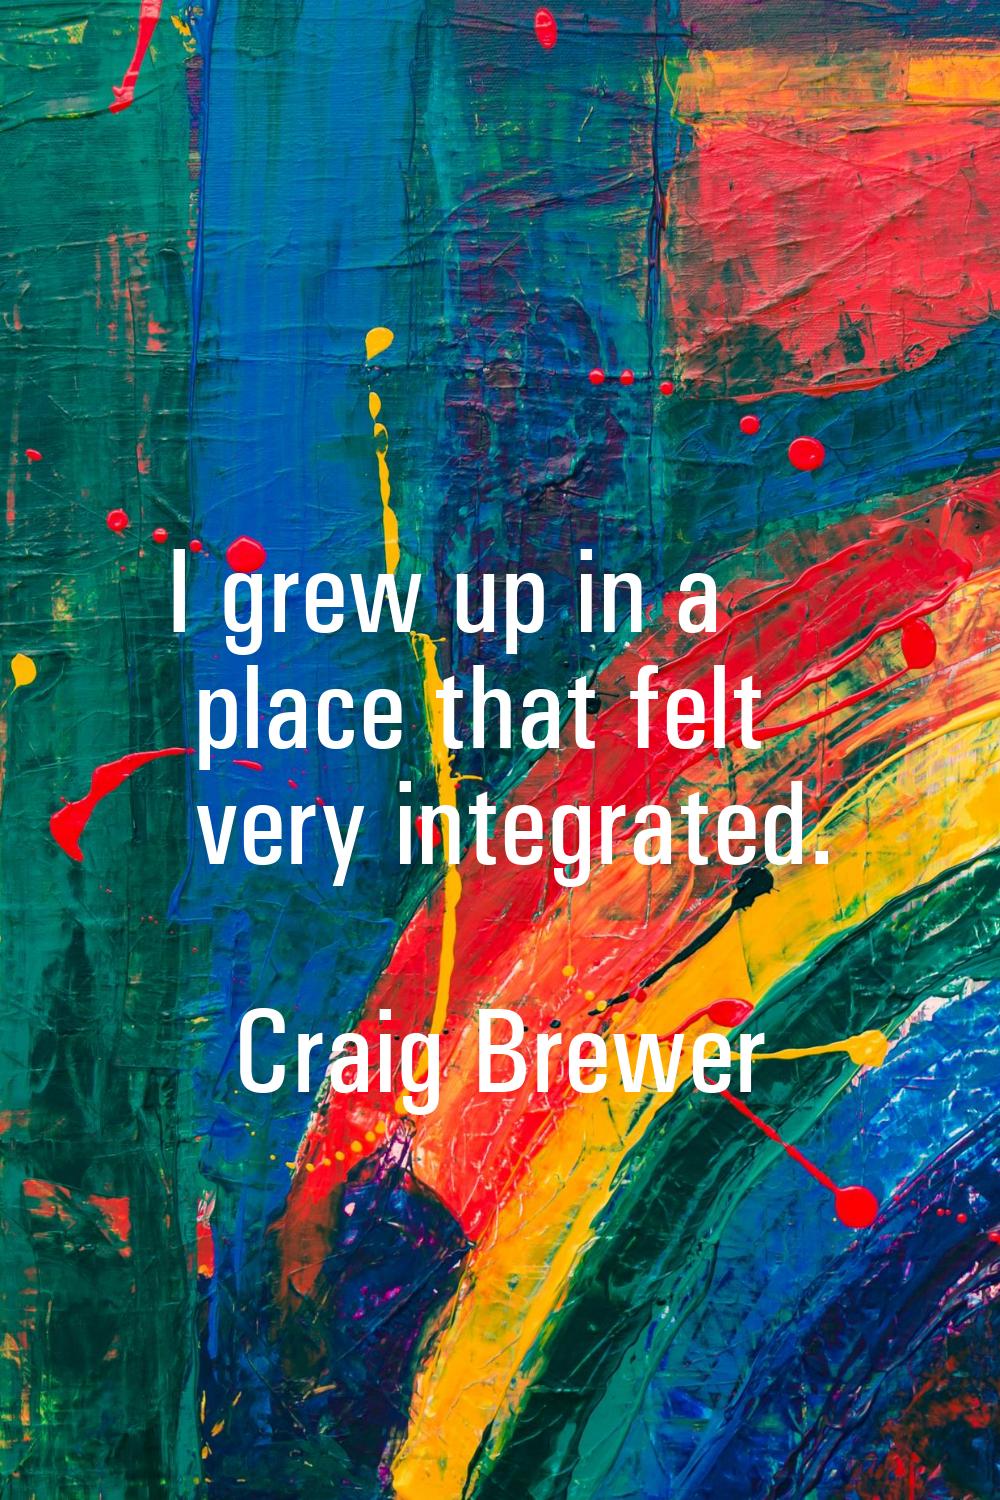 I grew up in a place that felt very integrated.